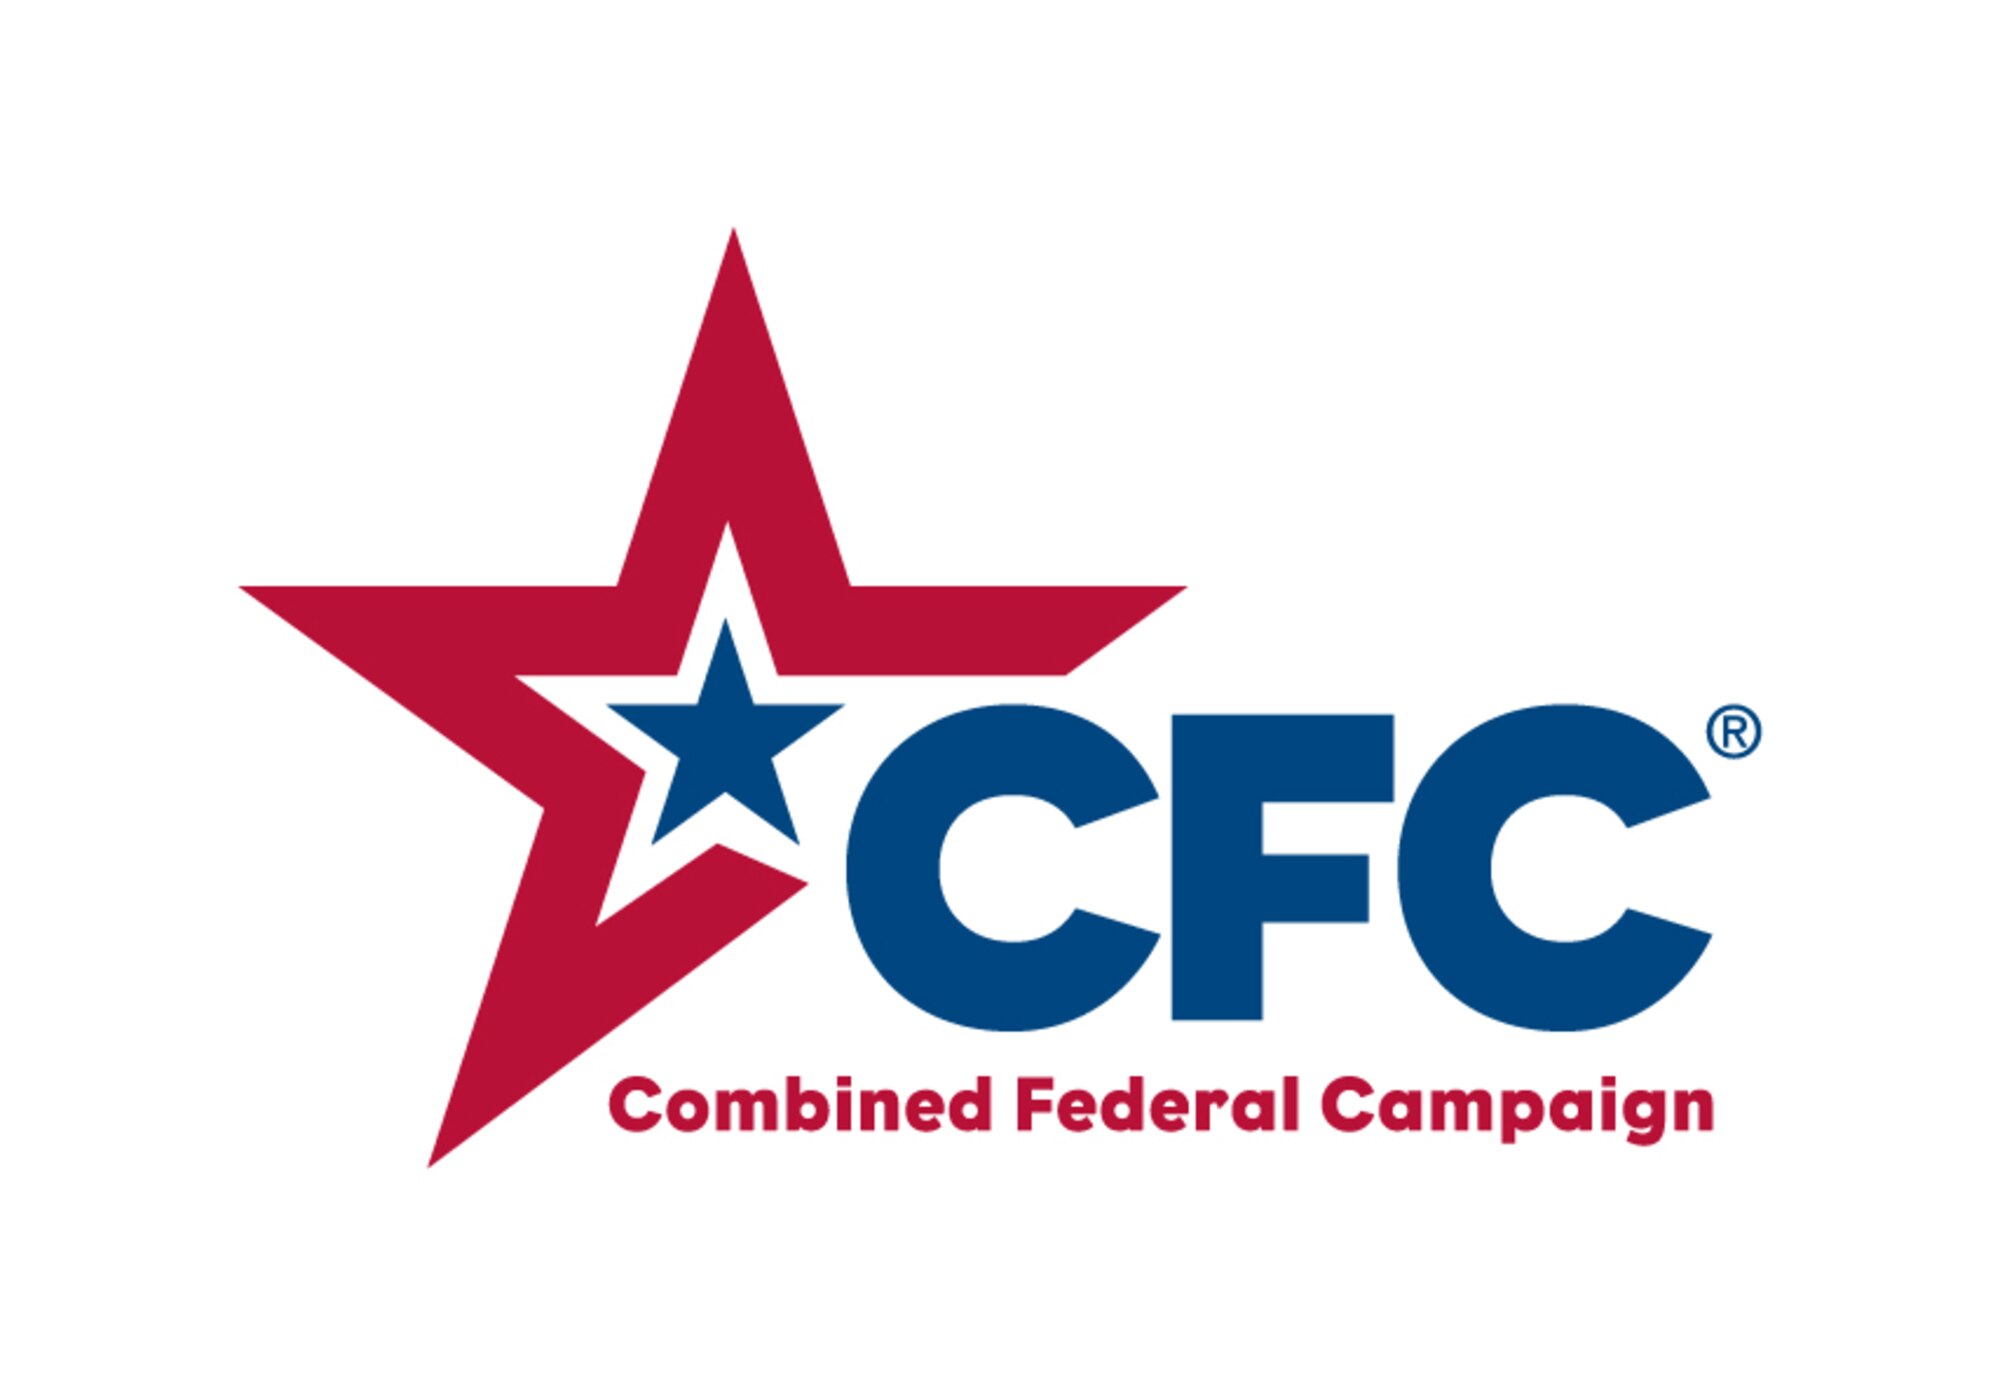 The Combined Federal Campaign (CFC) officially kicked off at MacDill Air Force Base, Fla., Oct. 18, 2018.